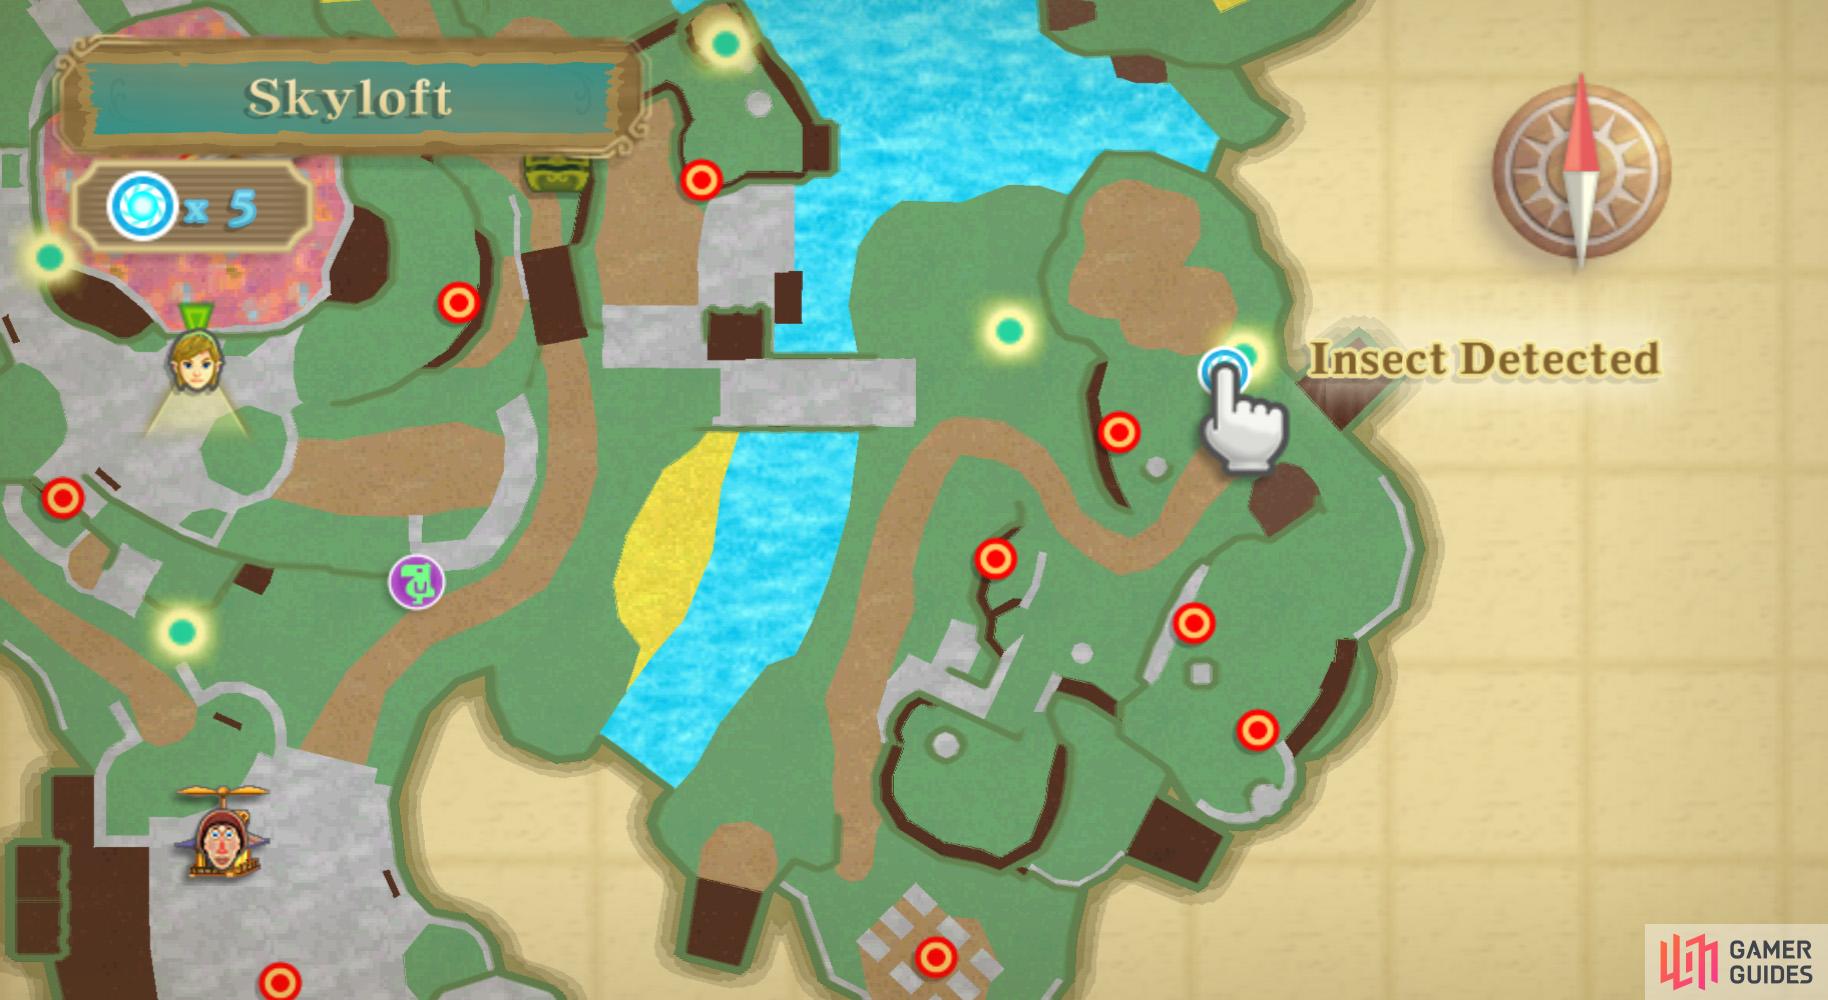 Possible bug locations will have a green circle mark on the map.